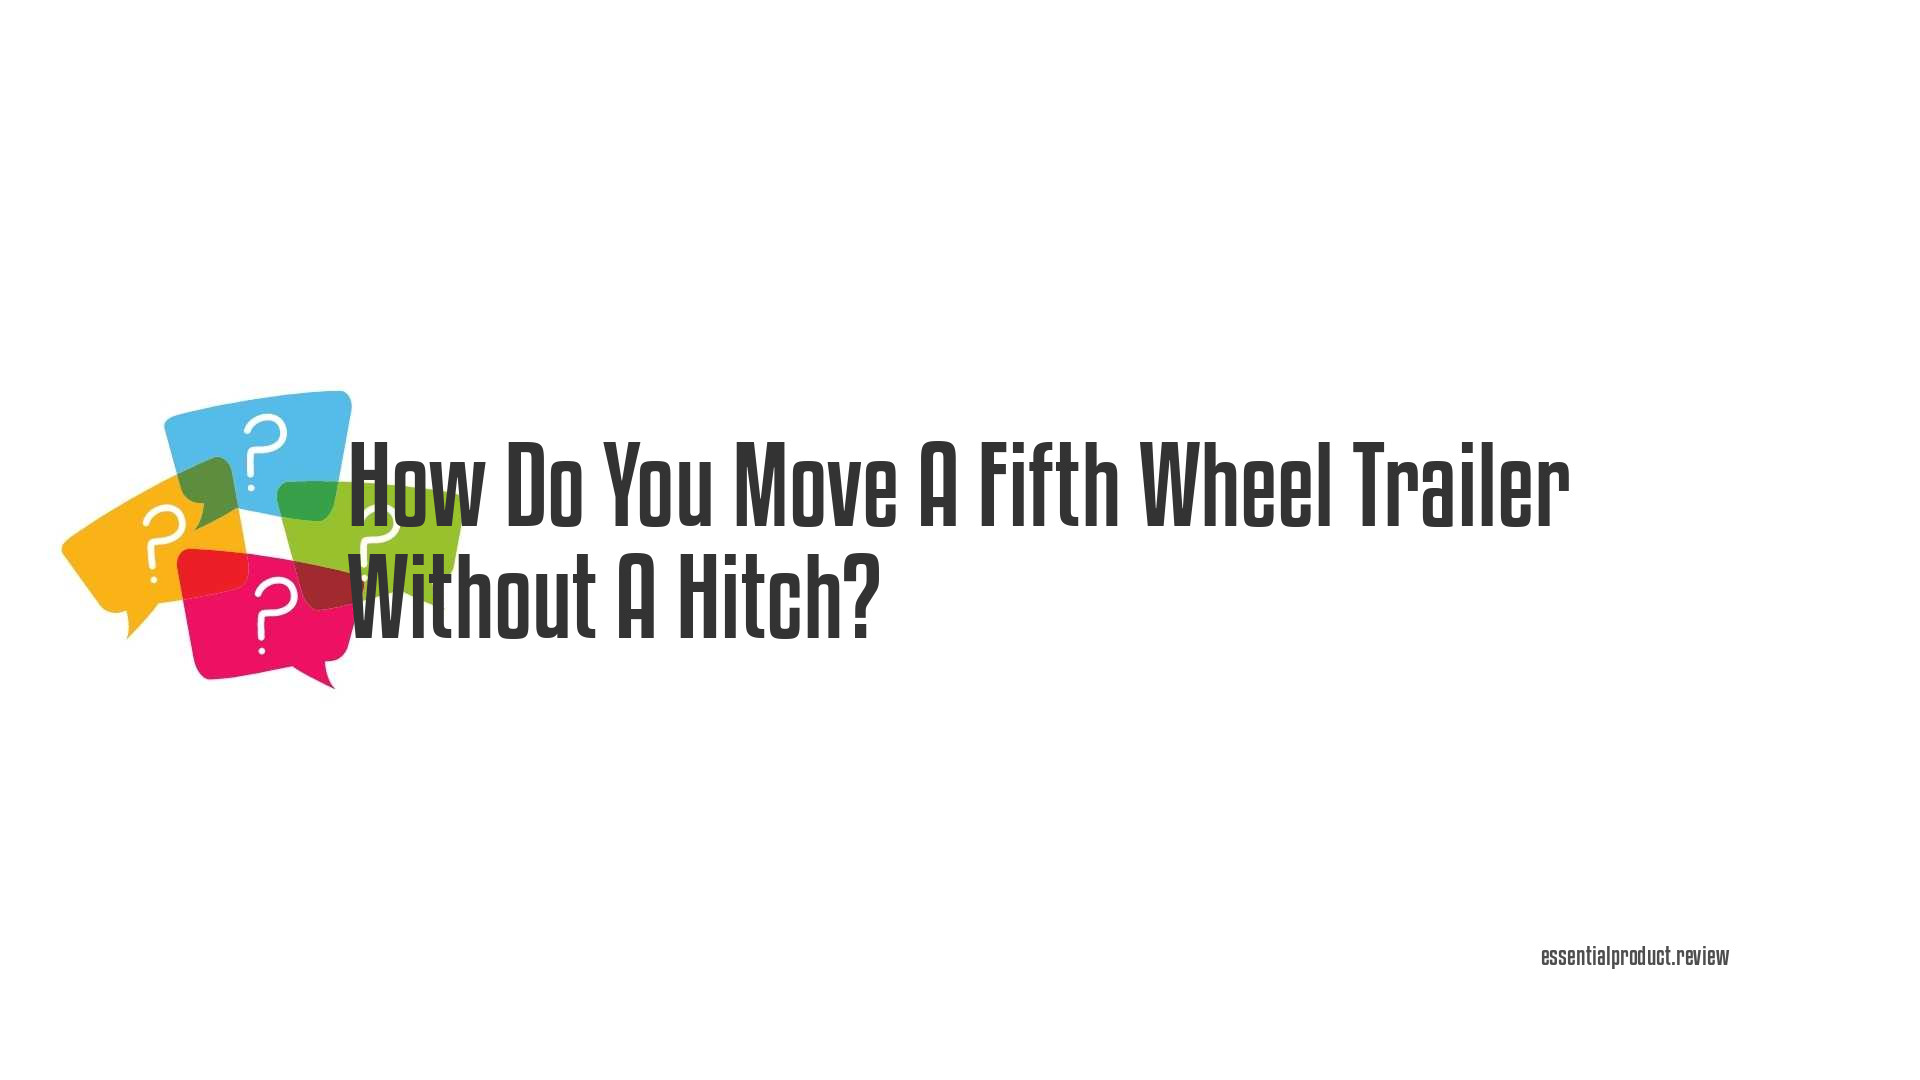 How Do You Move A Fifth Wheel Trailer Without A Hitch?